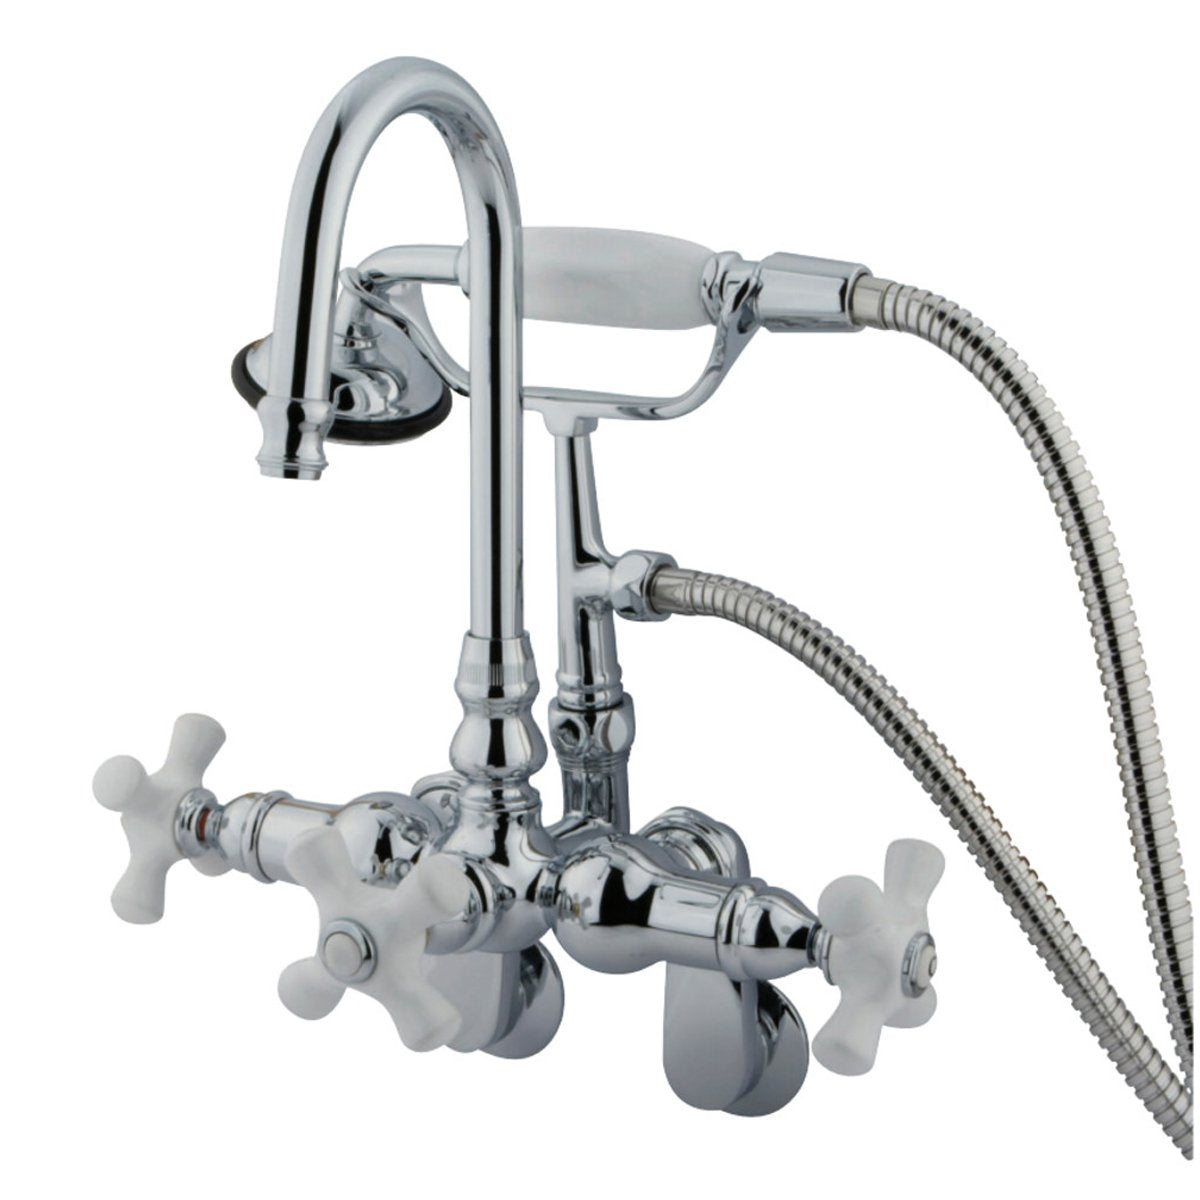 Kingston Brass Vintage Clawfoot Tub Faucet with Hand Shower in Polished Chrome